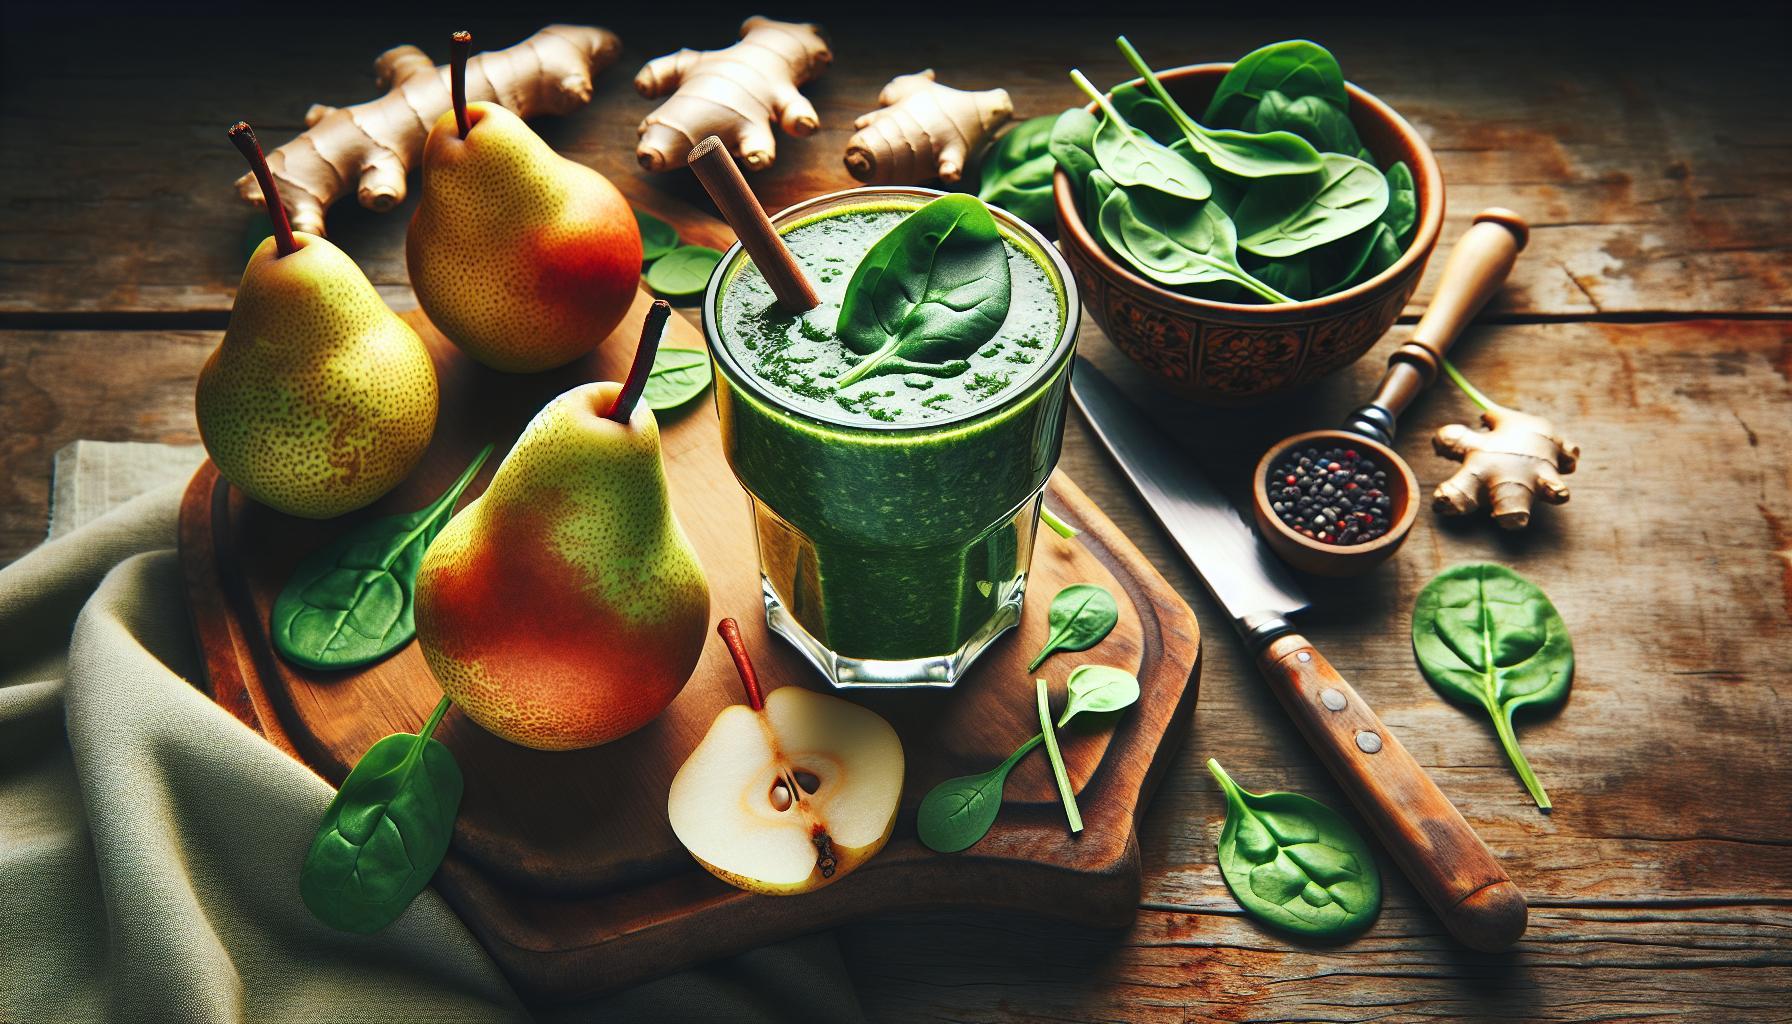 Revitalize Your Health: Pear and Spinach Detox Smoothie Recipe for a Natural Cleanse